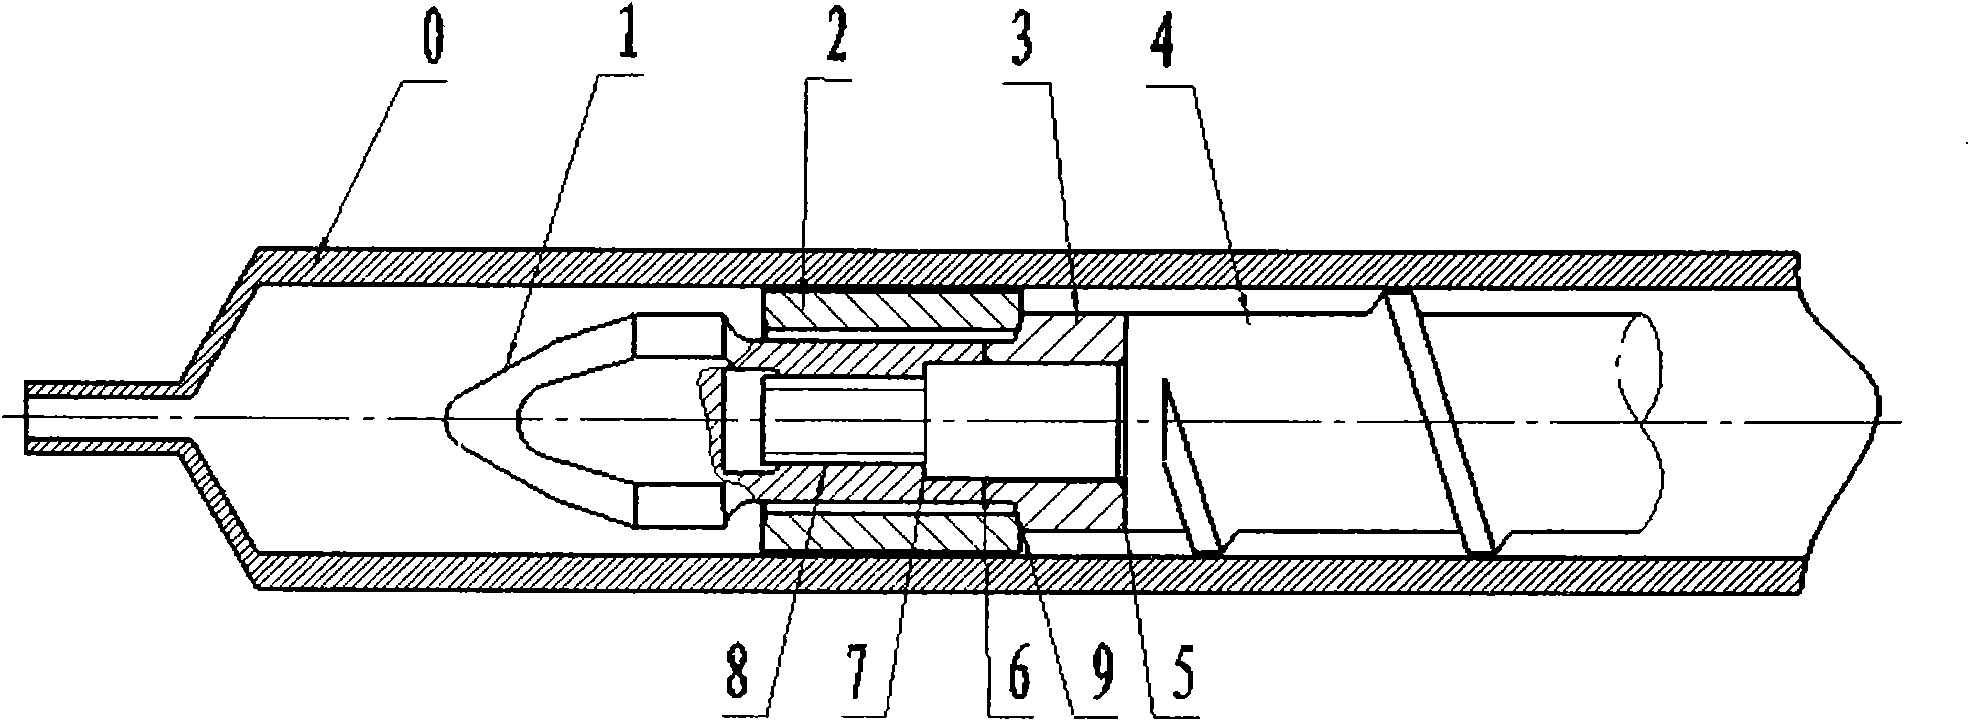 Threaded rod of injection molding machine with reversely connected threaded rod head